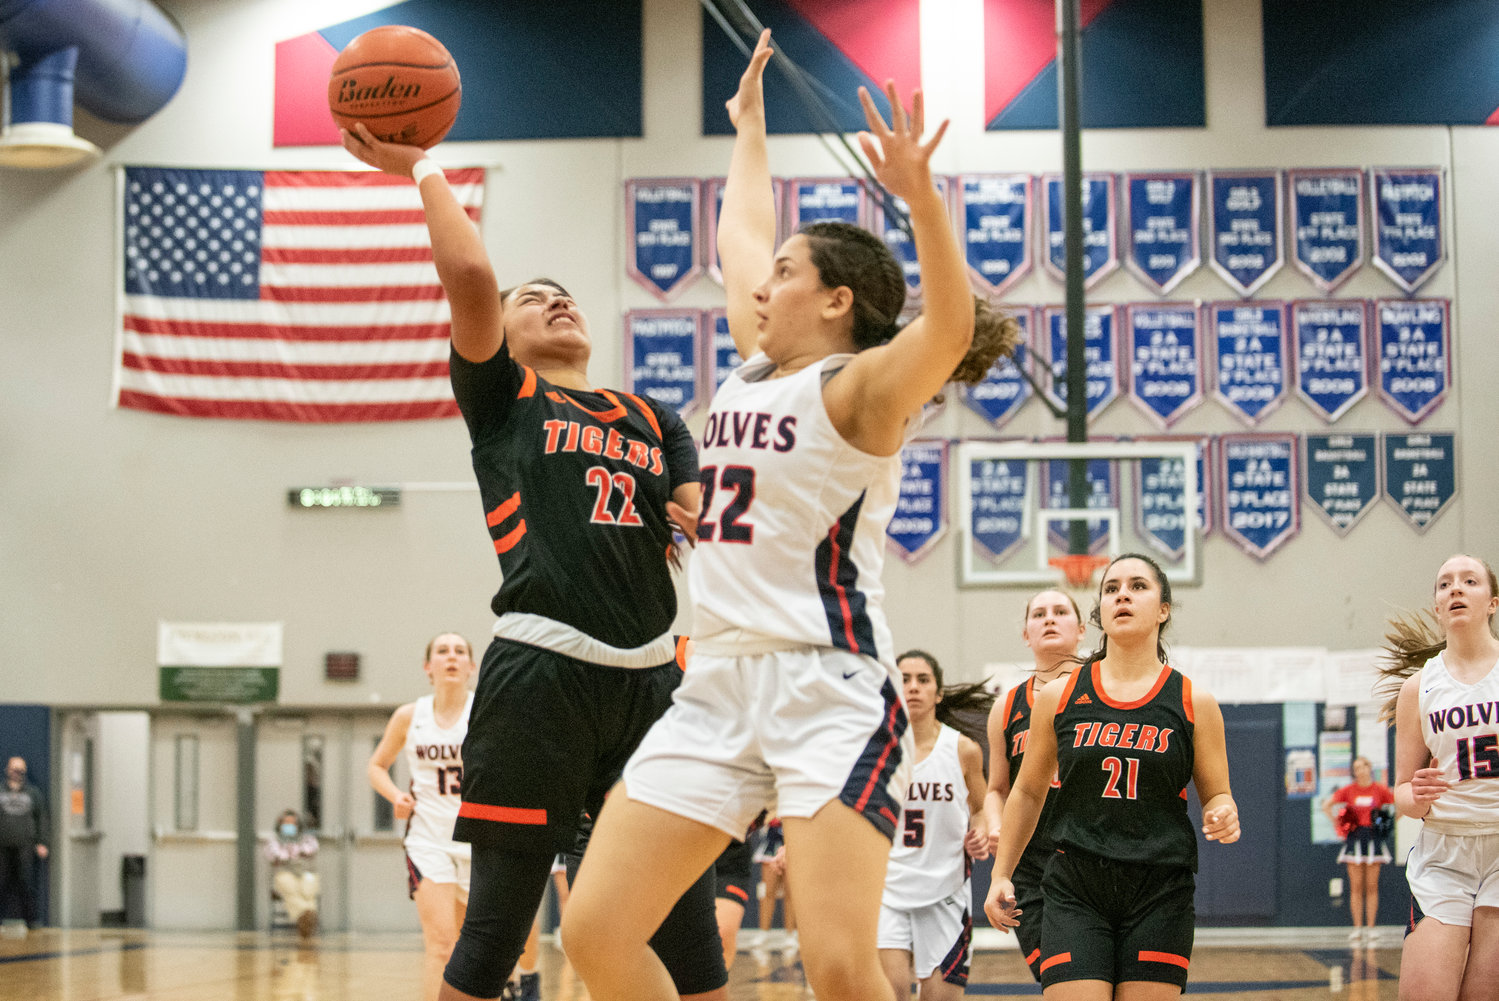 Centralia's Makayla Chavez (22) goes for a layup against Black Hills on Dec. 17.